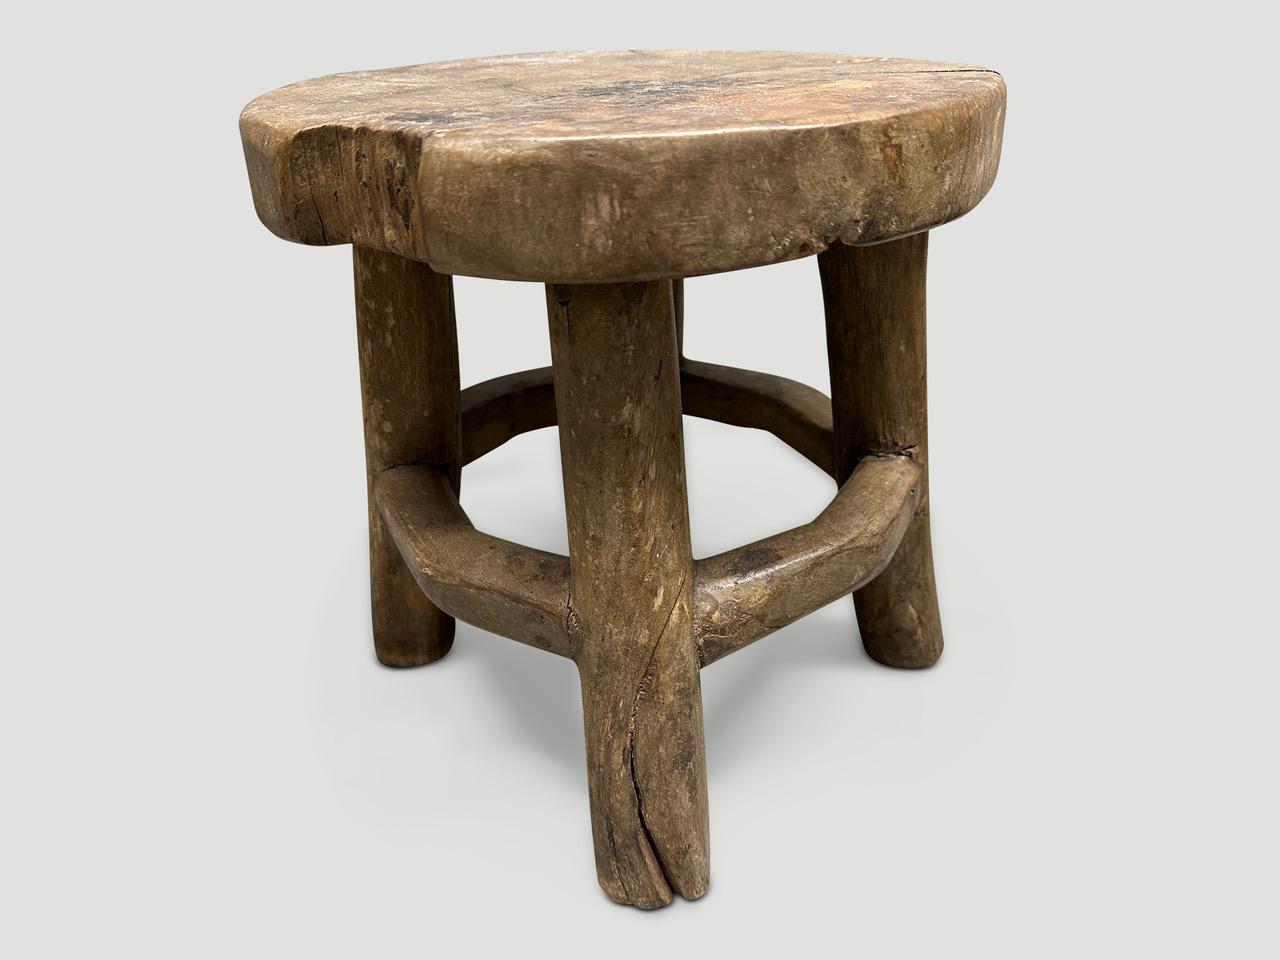 Antique hand made round side table or stool. Celebrating the cracks and crevices and all the other marks that time and loving use have left behind. Circa 1950

This side table or stool was hand made in the spirit of Wabi-Sabi, a Japanese philosophy